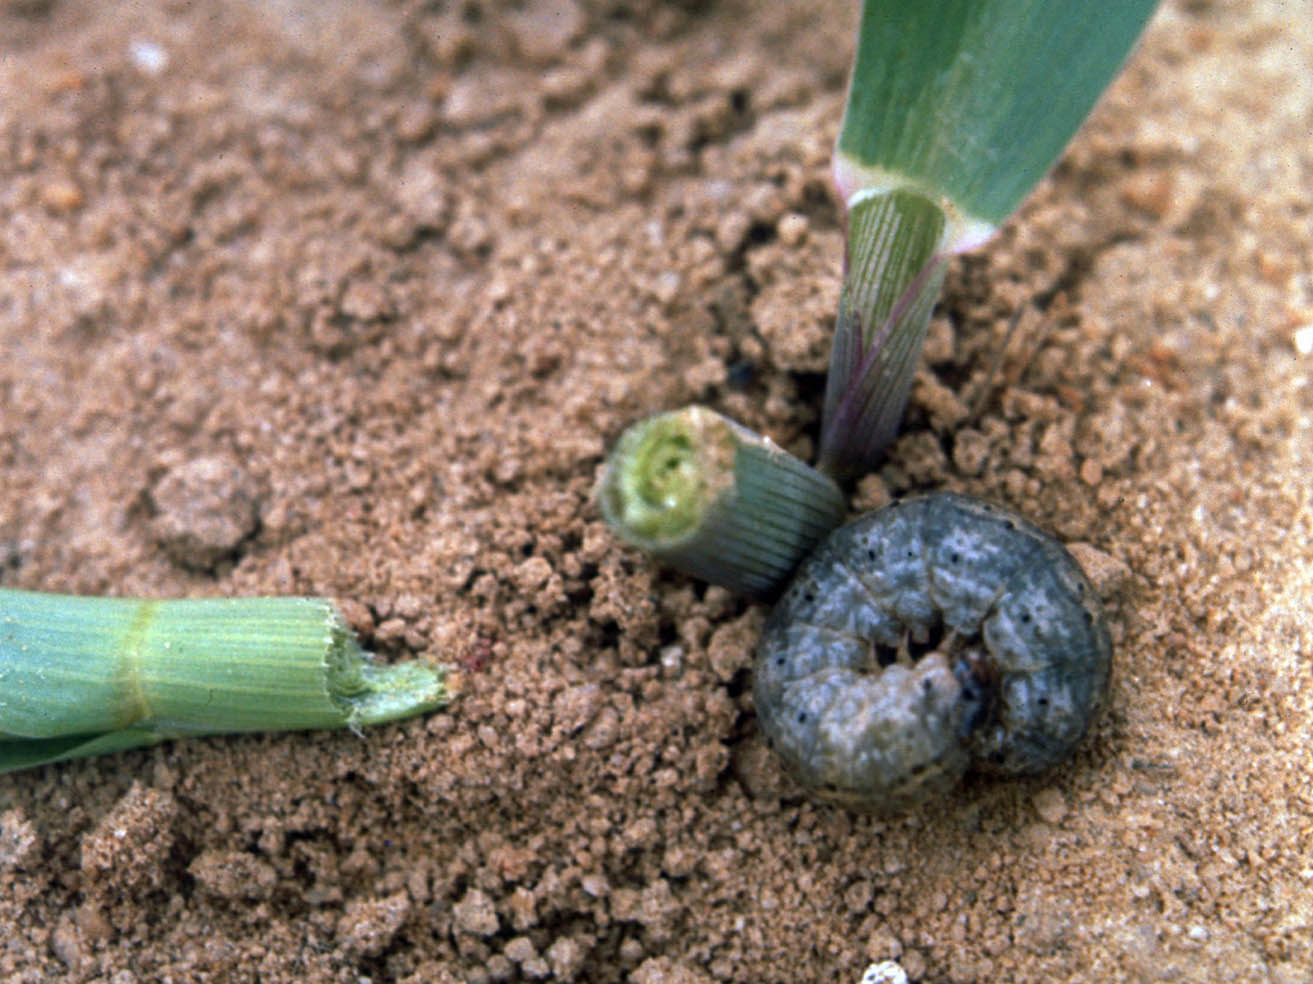 Figs. 7 and 8. Black cutworm larva and adult.